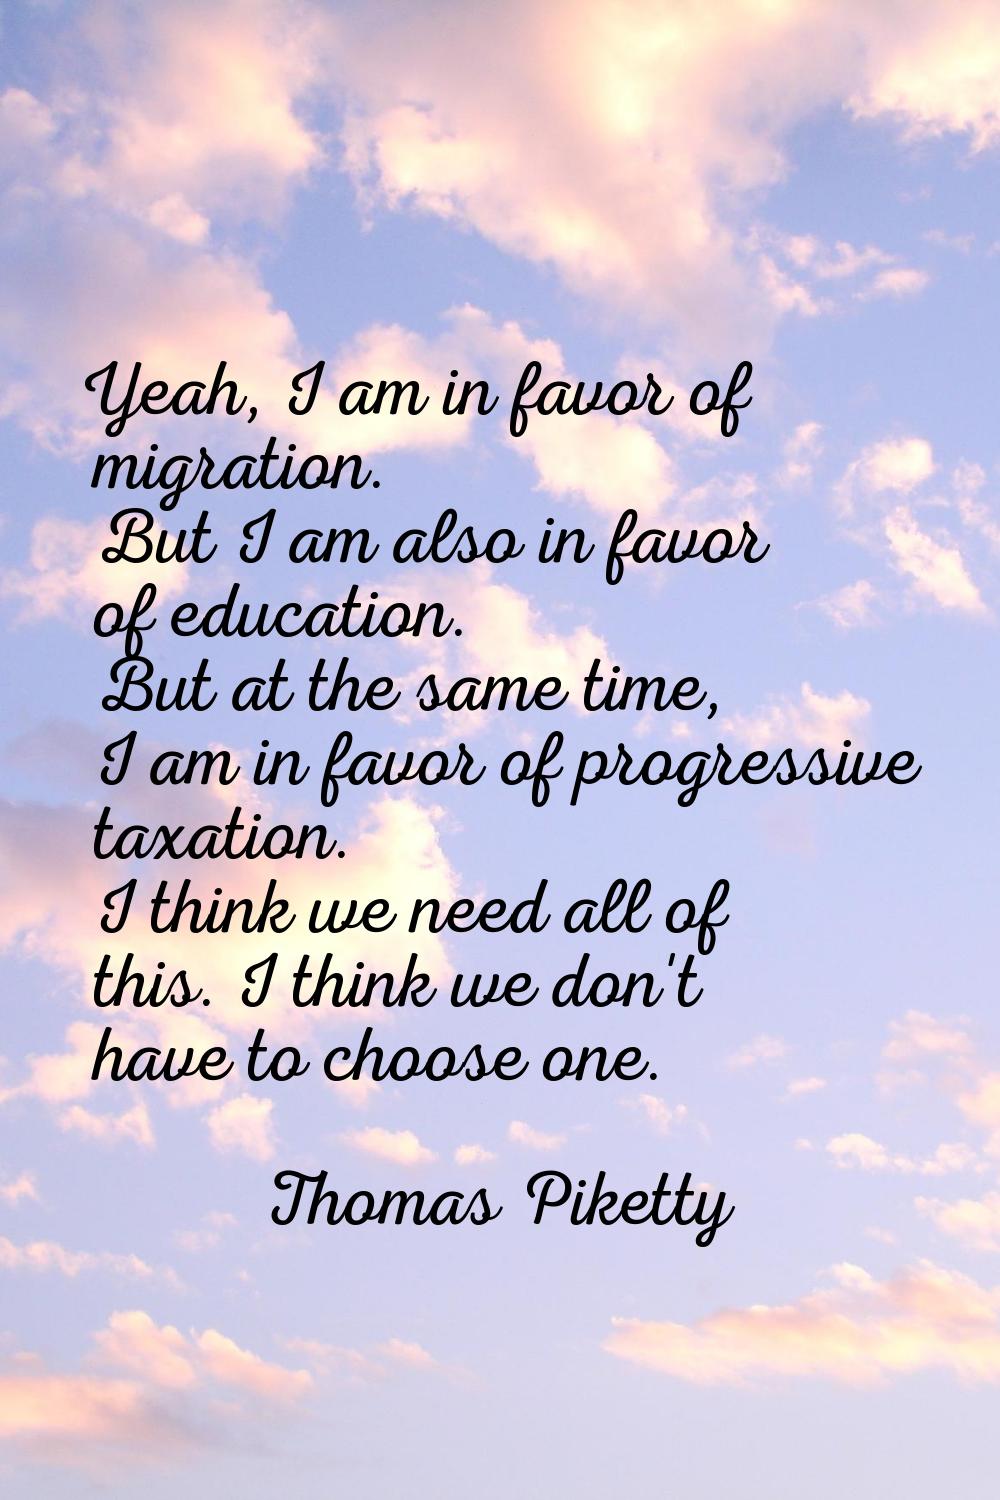 Yeah, I am in favor of migration. But I am also in favor of education. But at the same time, I am i